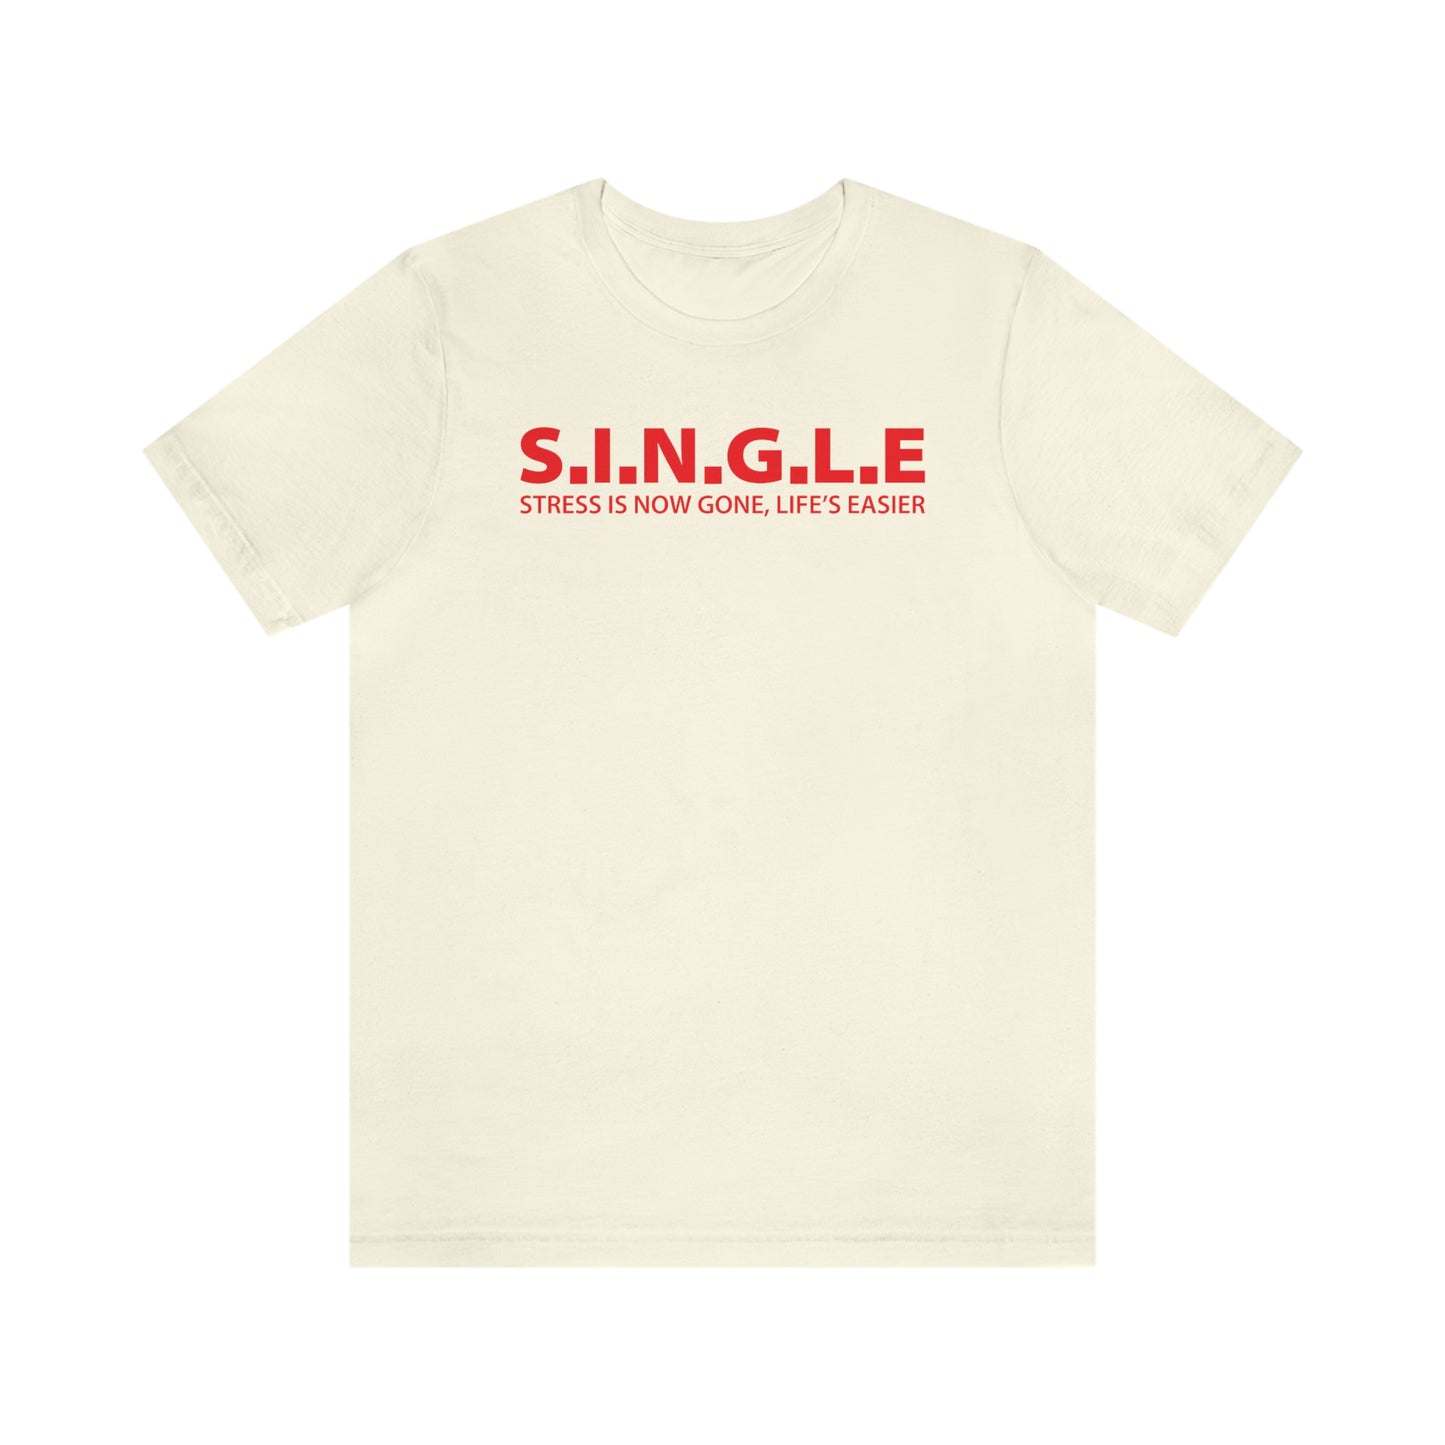 SINGLE Stress Is Now Gone, Life's Easier Valentine's Day Shirt